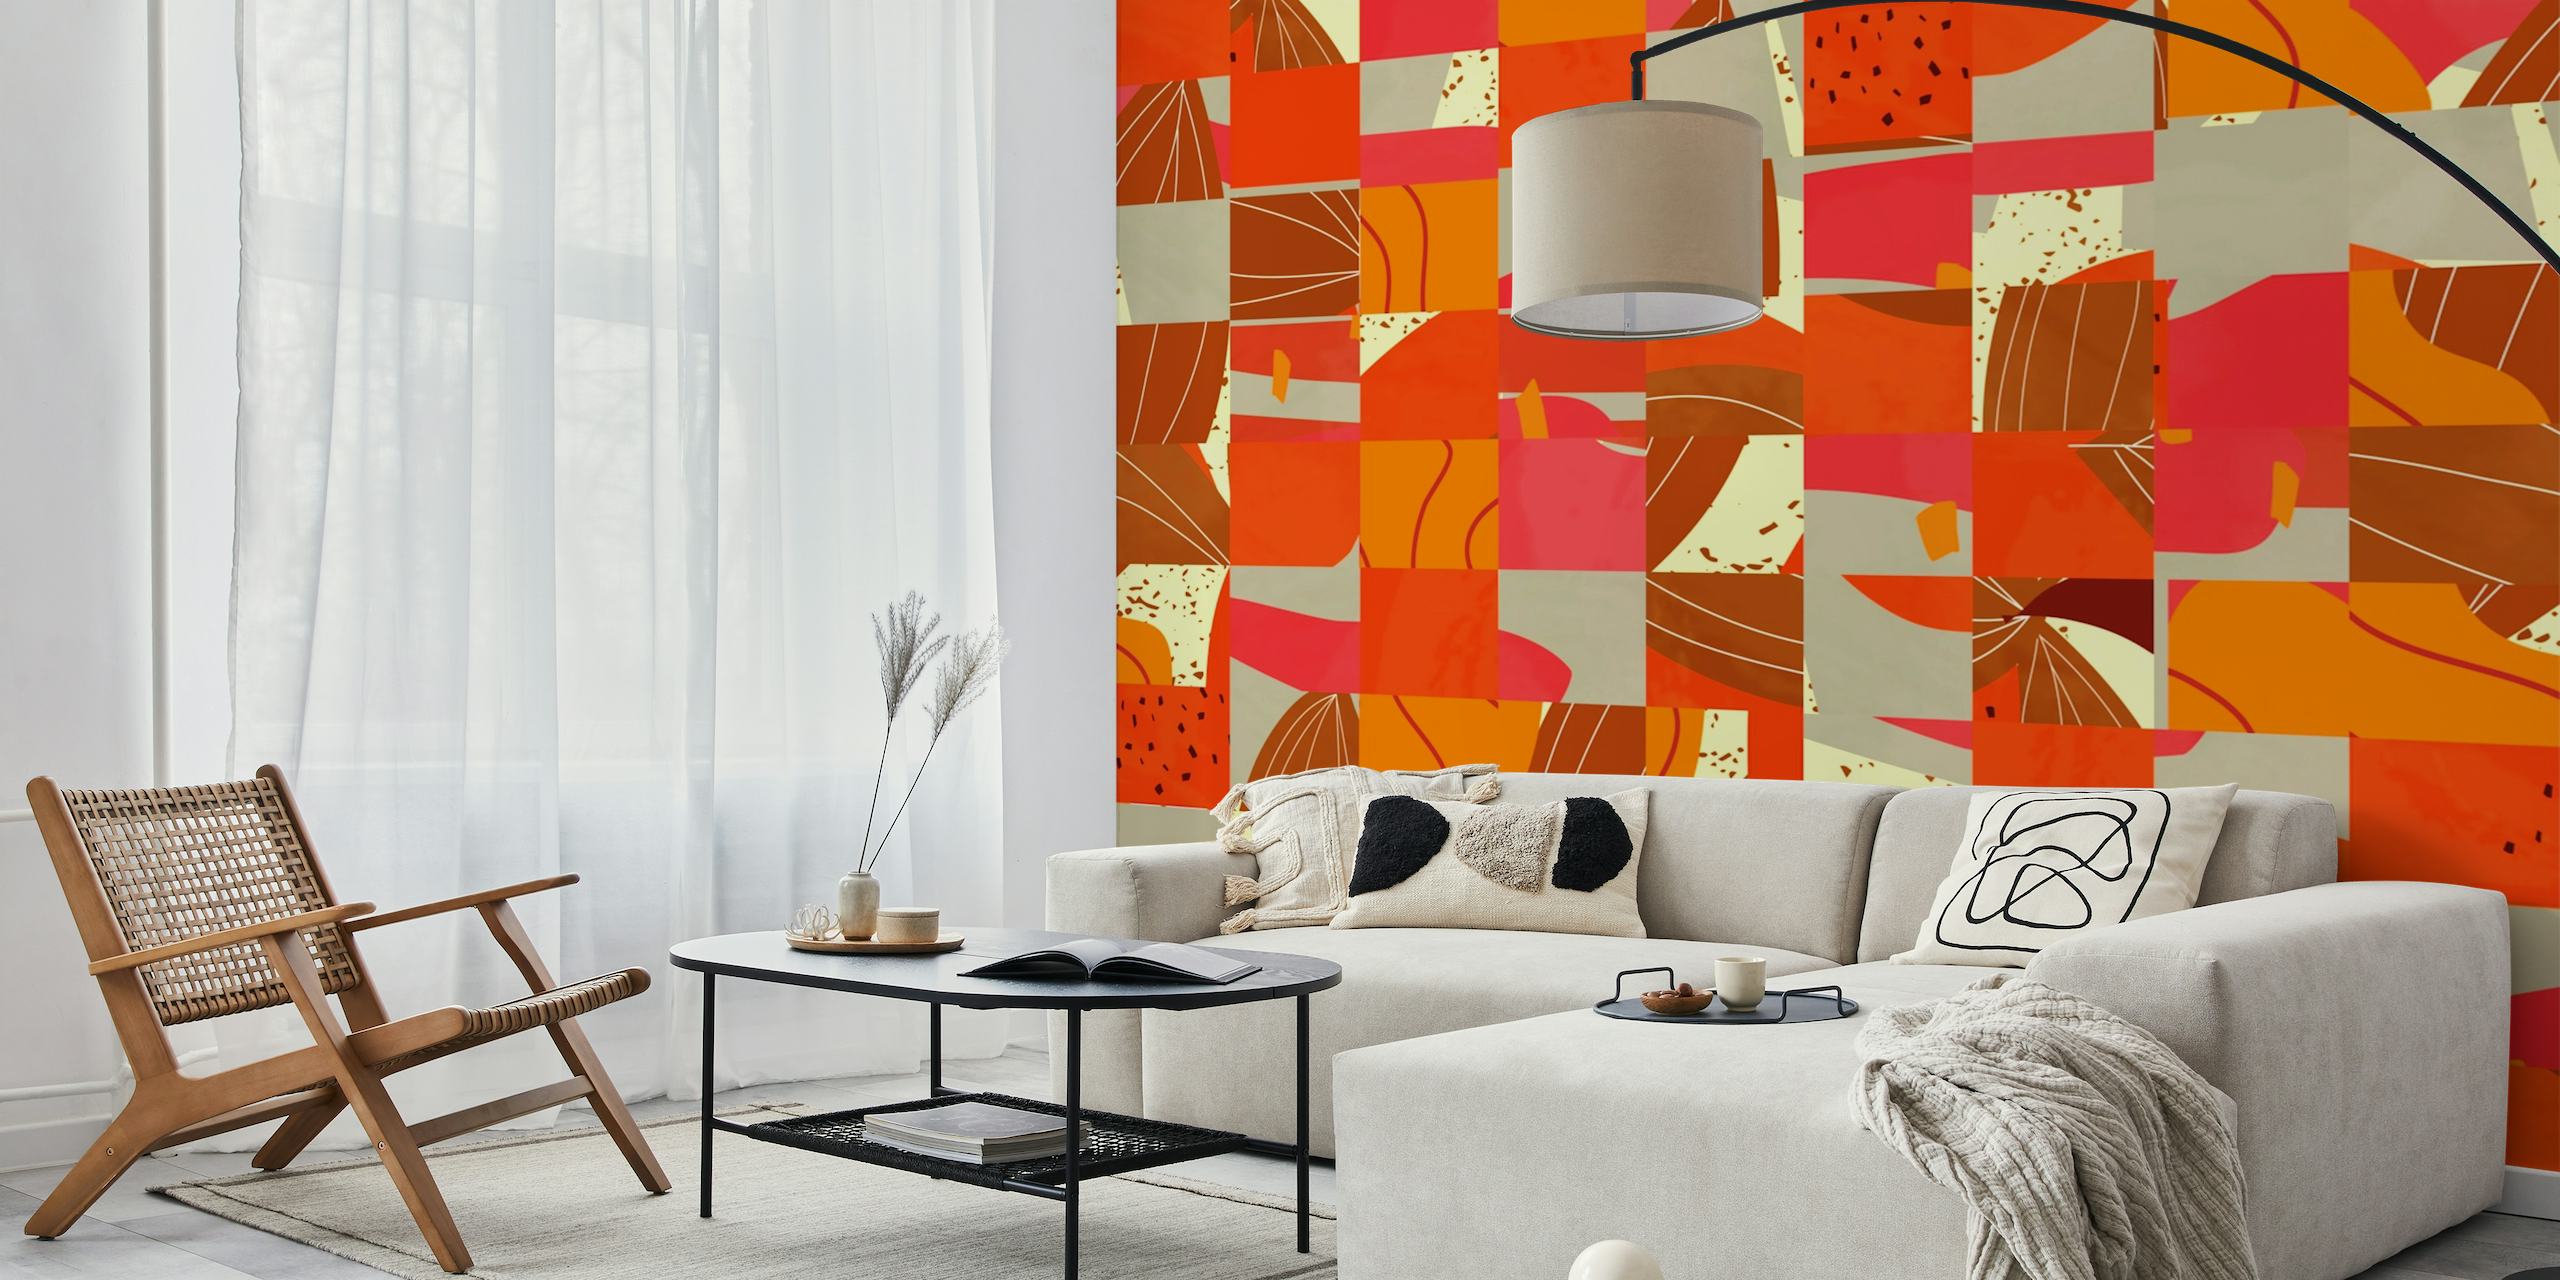 Kubik Mural featuring abstract geometric shapes in warm and cool tones